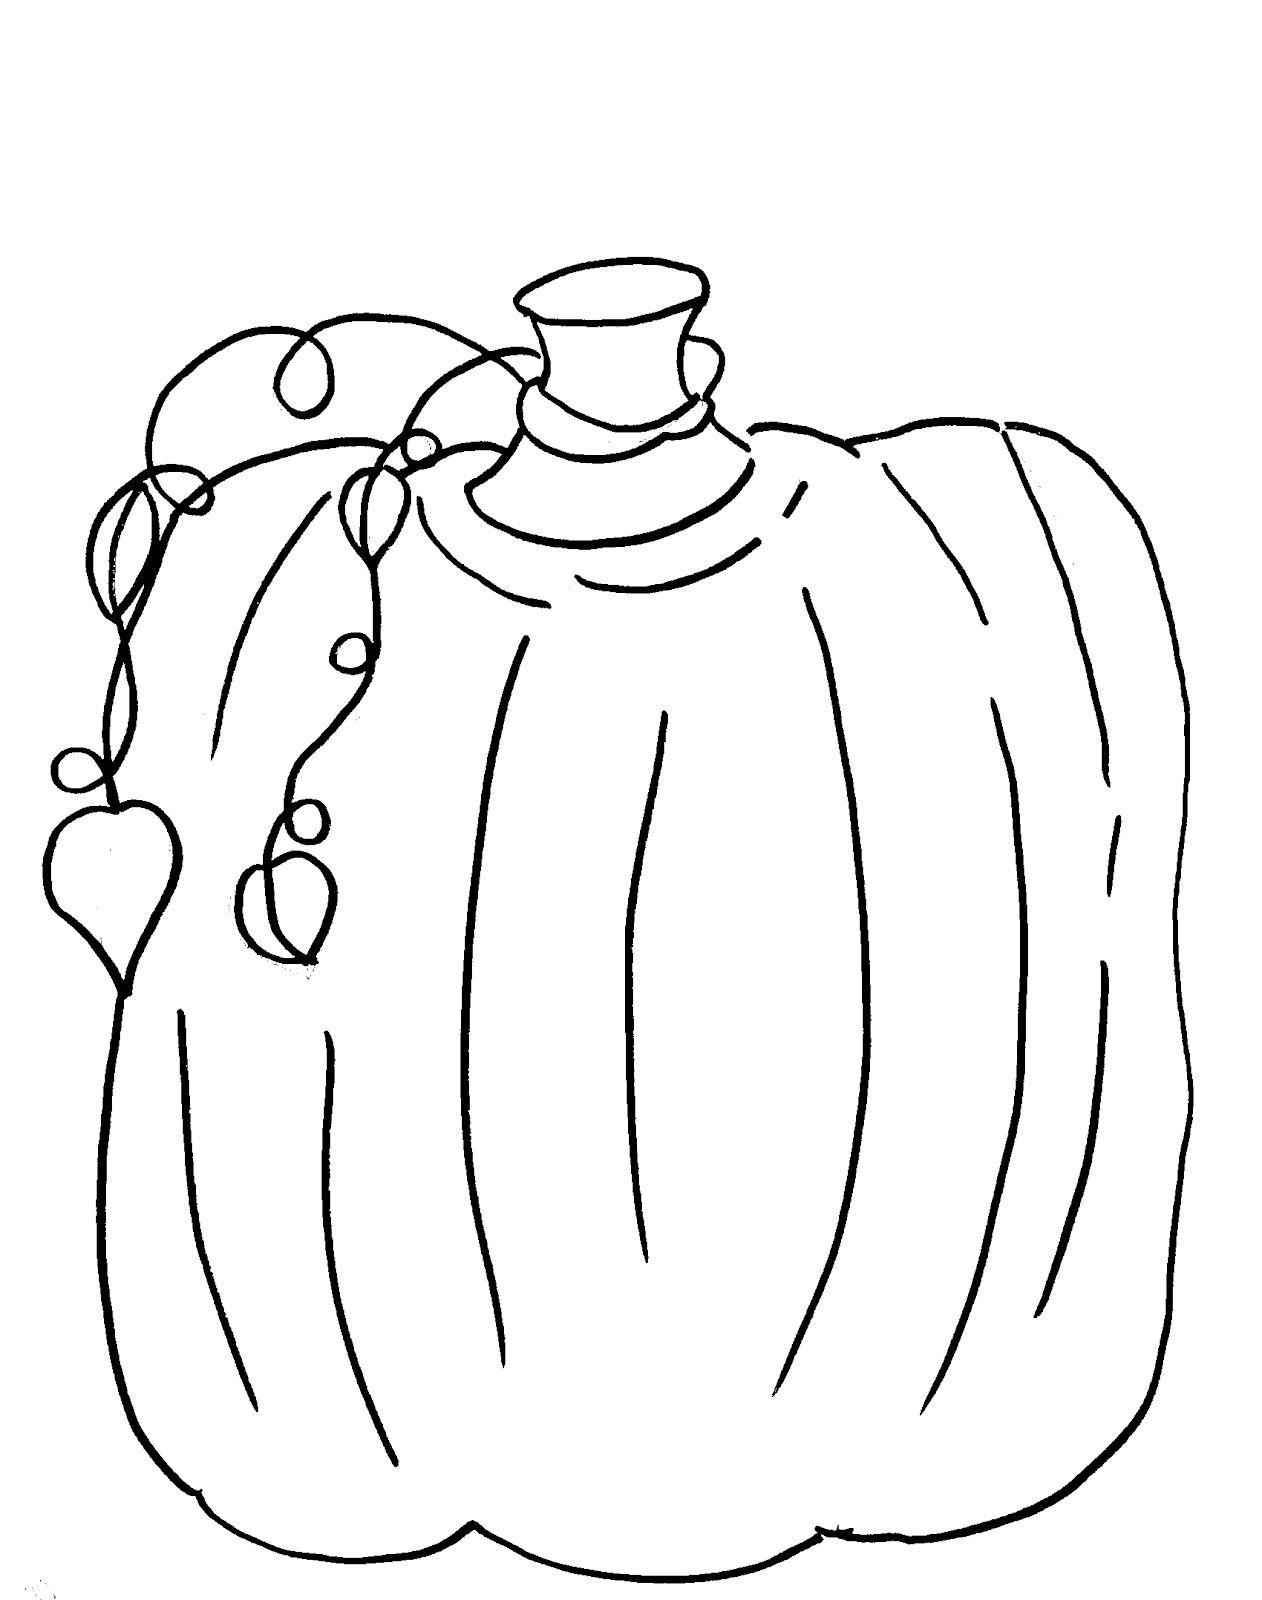  Back Pumpkin Halloween Coloring Pages